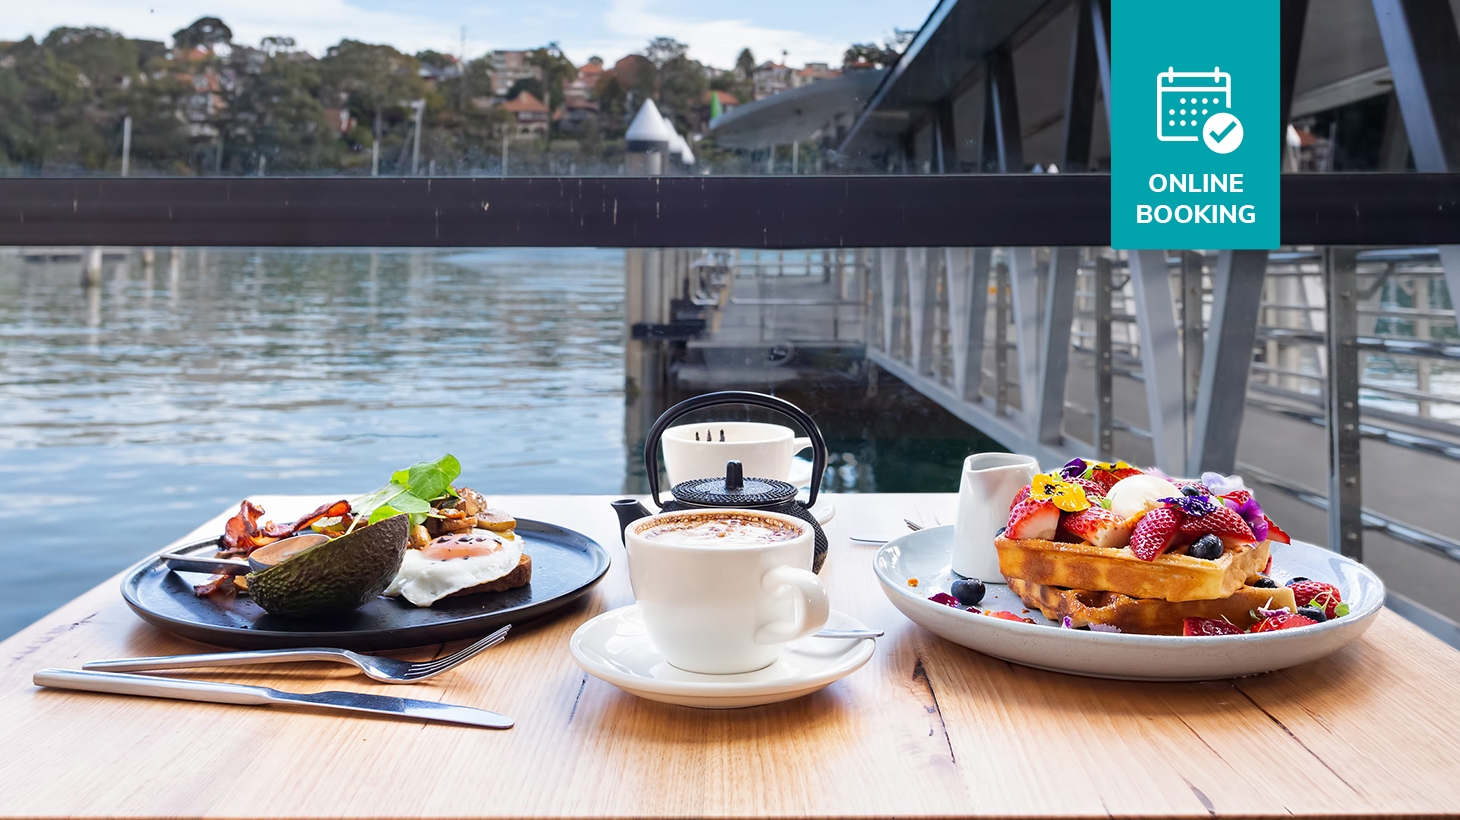 Waterfront Breakfast or Lunch with Drinks at Mosman Wharf from Cafe